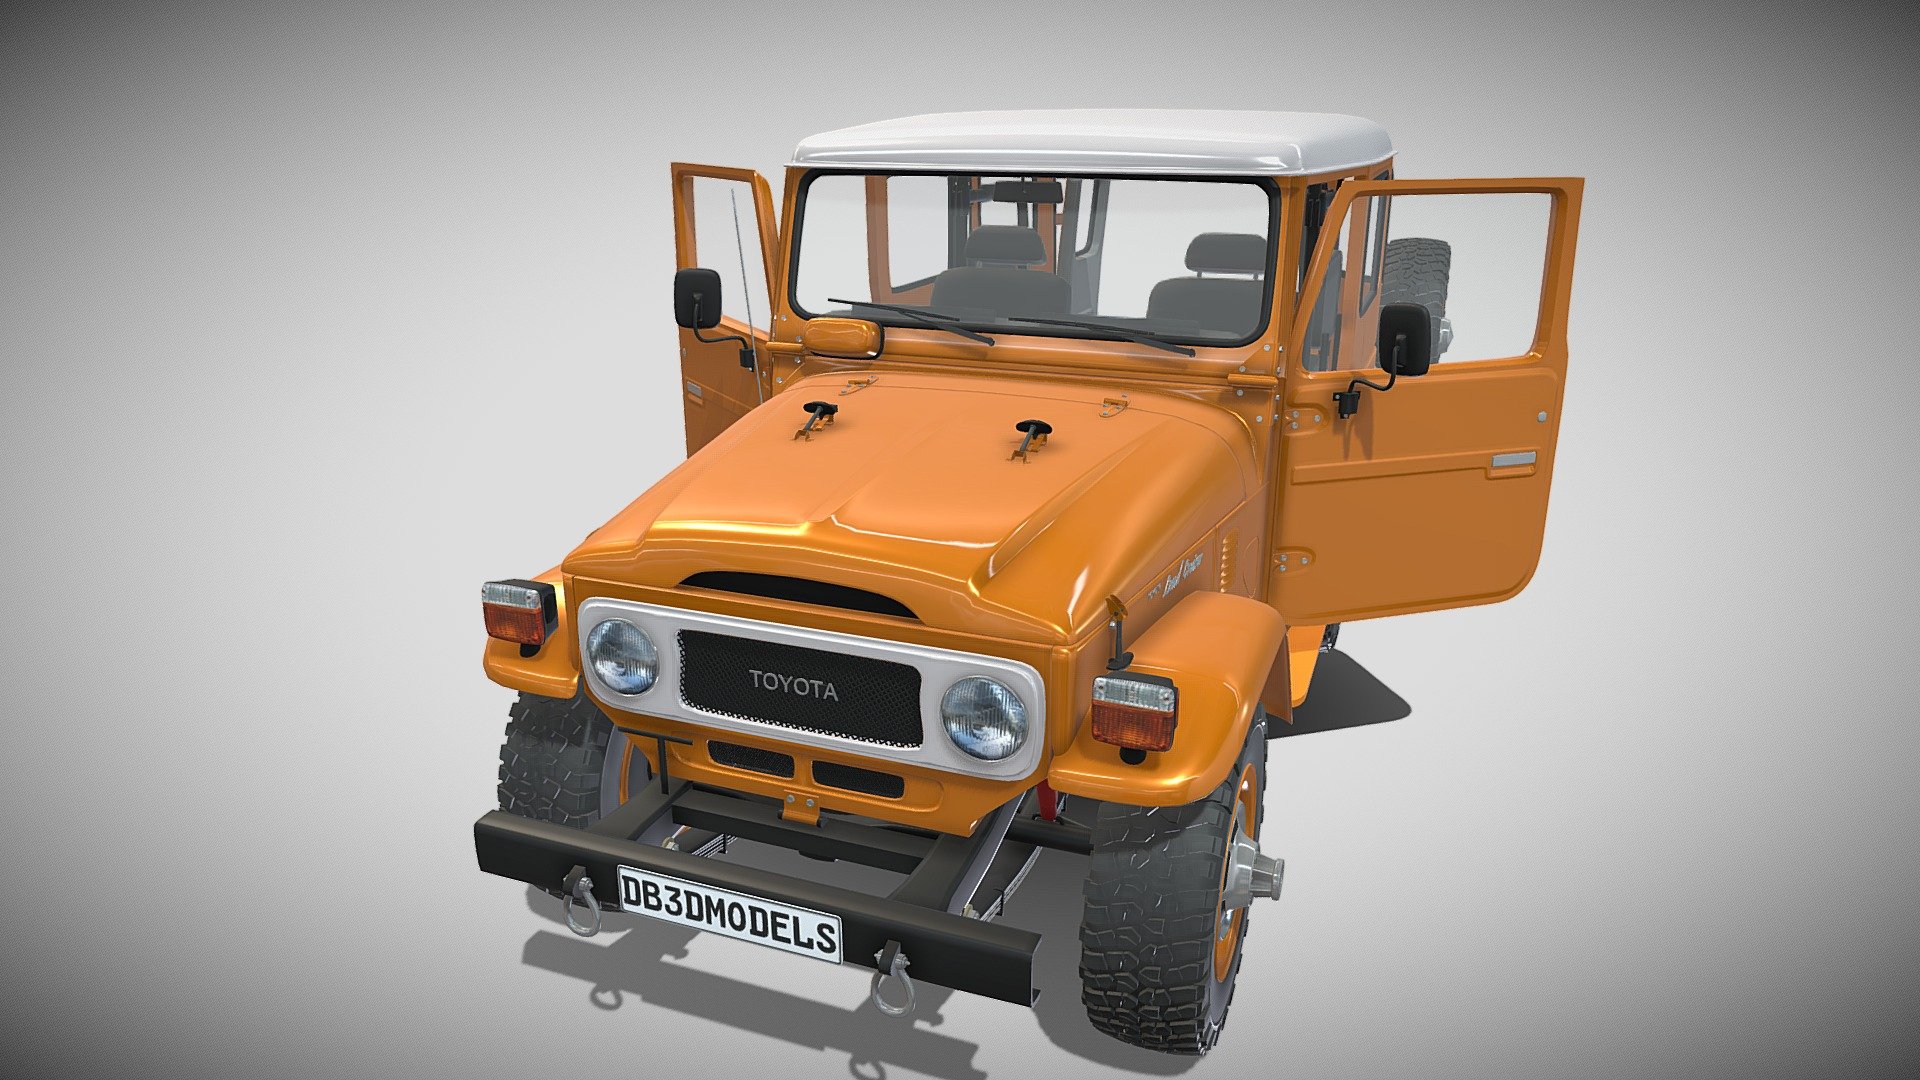 A very accurate model of the Toyota Land Cruiser FJ-40, with a highly detailed interior.

File formats:
-.blend, rendered with cycles, as seen in the images;
-.blend, rendered with cycles, with doors open, as seen in images;
-.obj, with materials applied and textures;
-.obj, with materials applied and textures and doors open;
-.dae, with materials applied and textures;
-.dae, with materials applied and textures and doors open;
-.fbx, with material slots applied;
-.fbx, with material slots applied and doors open;
-.stl;
-.stl with doors open;

3D Software:
This 3d model was originally created in Blender 2.79 and rendered with Cycles.

Materials and textures:
The model has materials applied in all formats, and is ready to import and render.
The model comes with multiple png image textures.

Preview scenes:
The preview images are rendered in Blender using its built-in render engine &lsquo;Cycles' 3d model